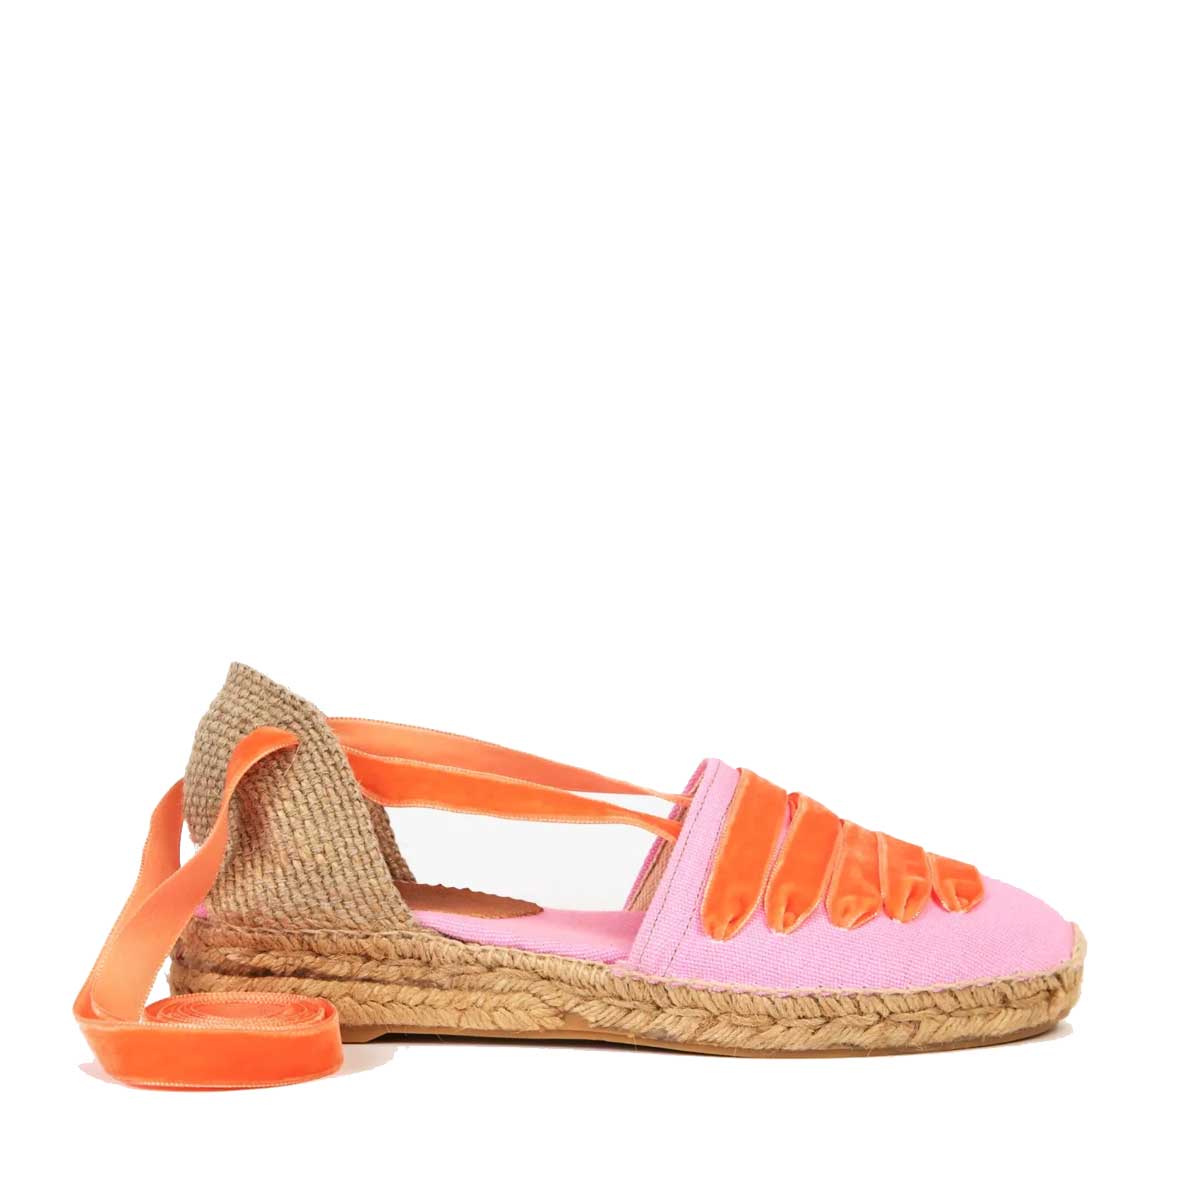 Penelope Chilvers Low Valenciana Dali Espadrille - Women's - Pink/Coral